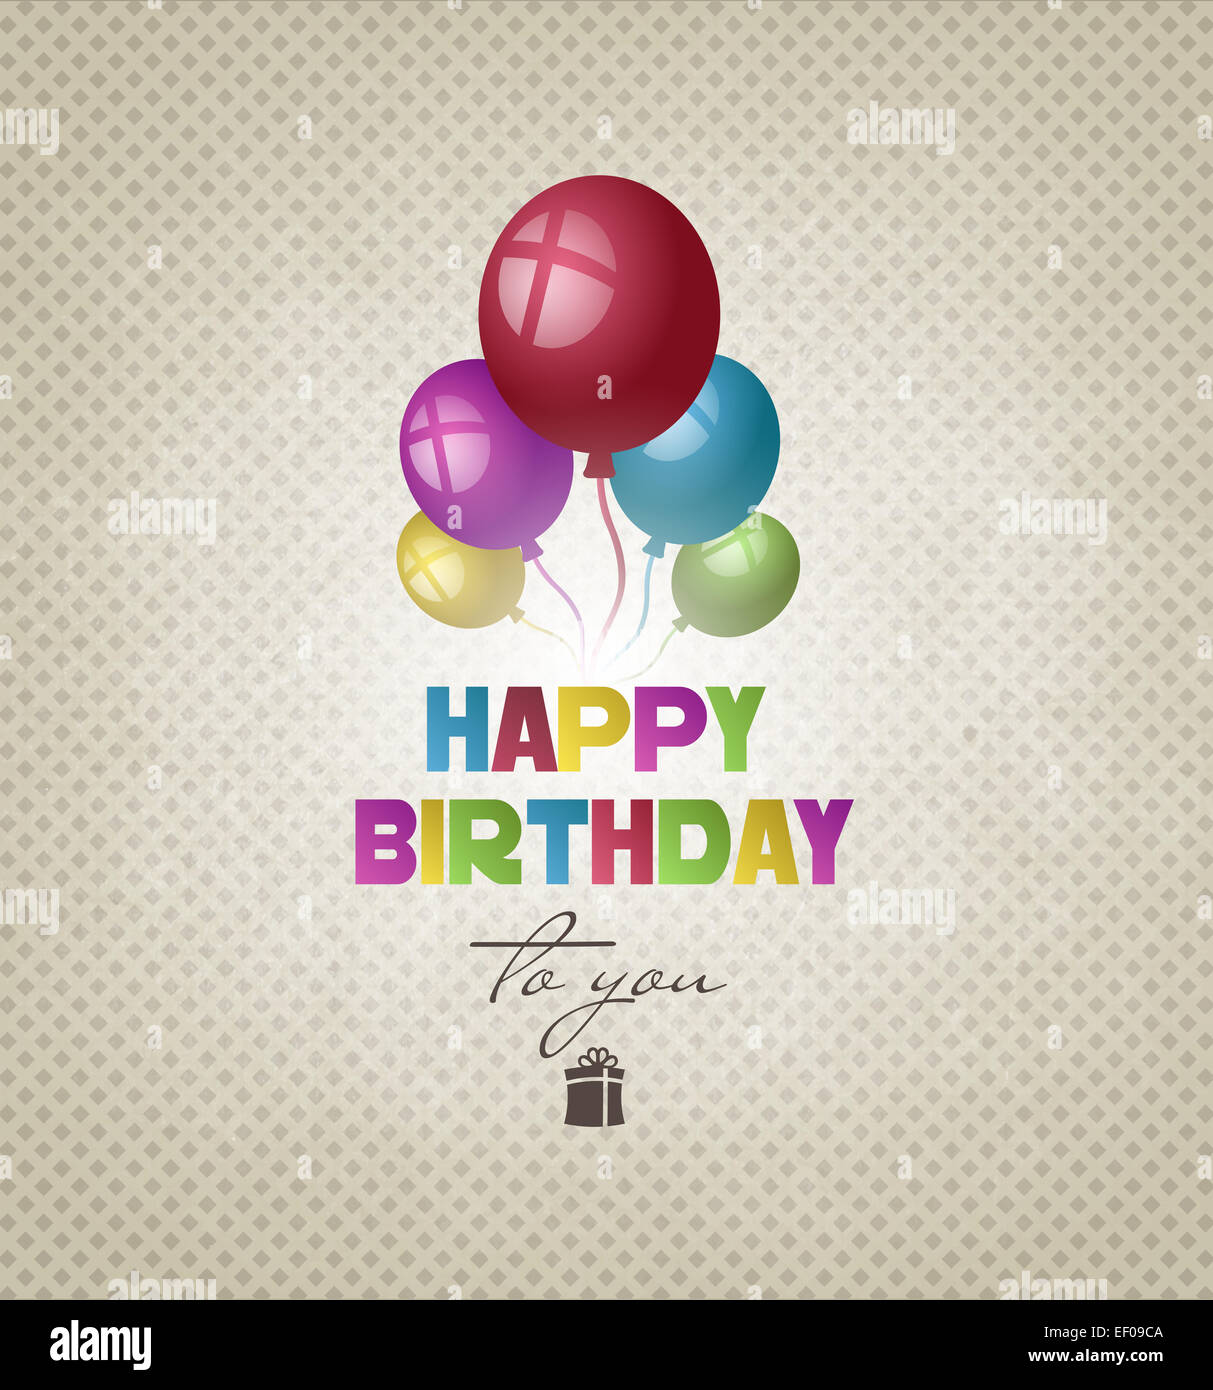 Happy Birthday Background With Balls, Gift And Title Inscription Stock Photo